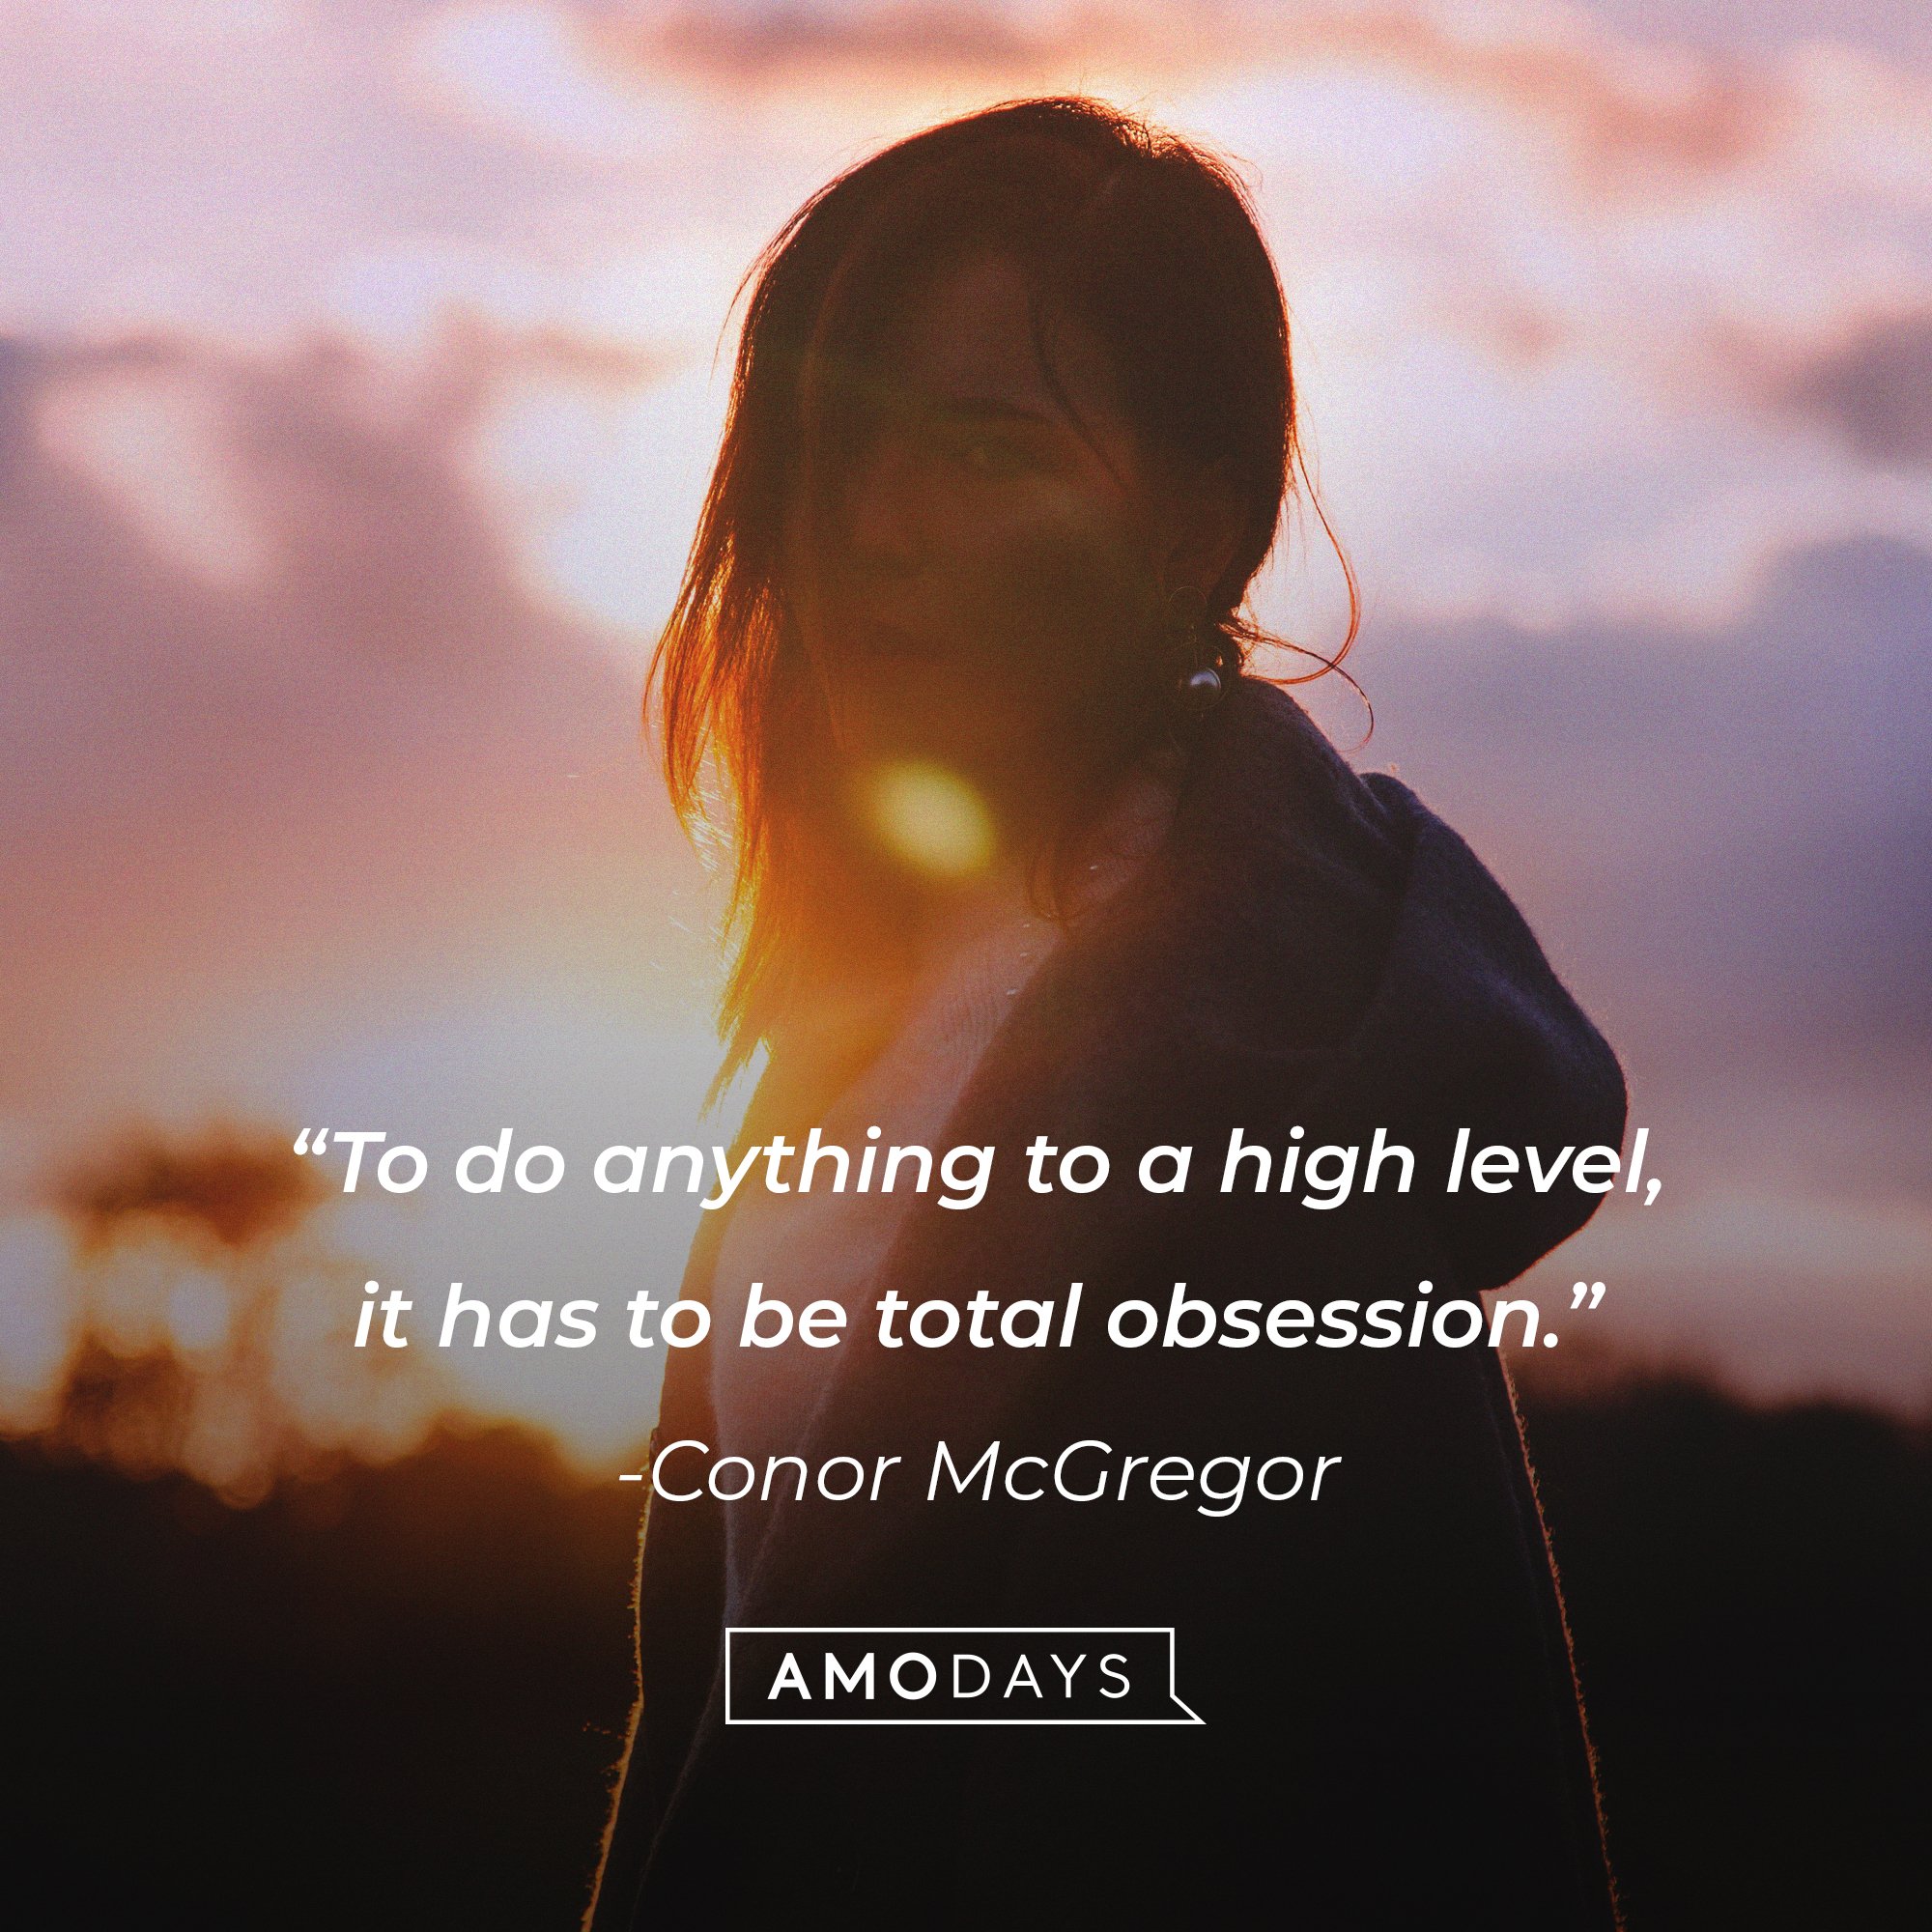 Conor McGregor's quote: "To do anything to a high level, it has to be a total obsession." | Image: AmoDays